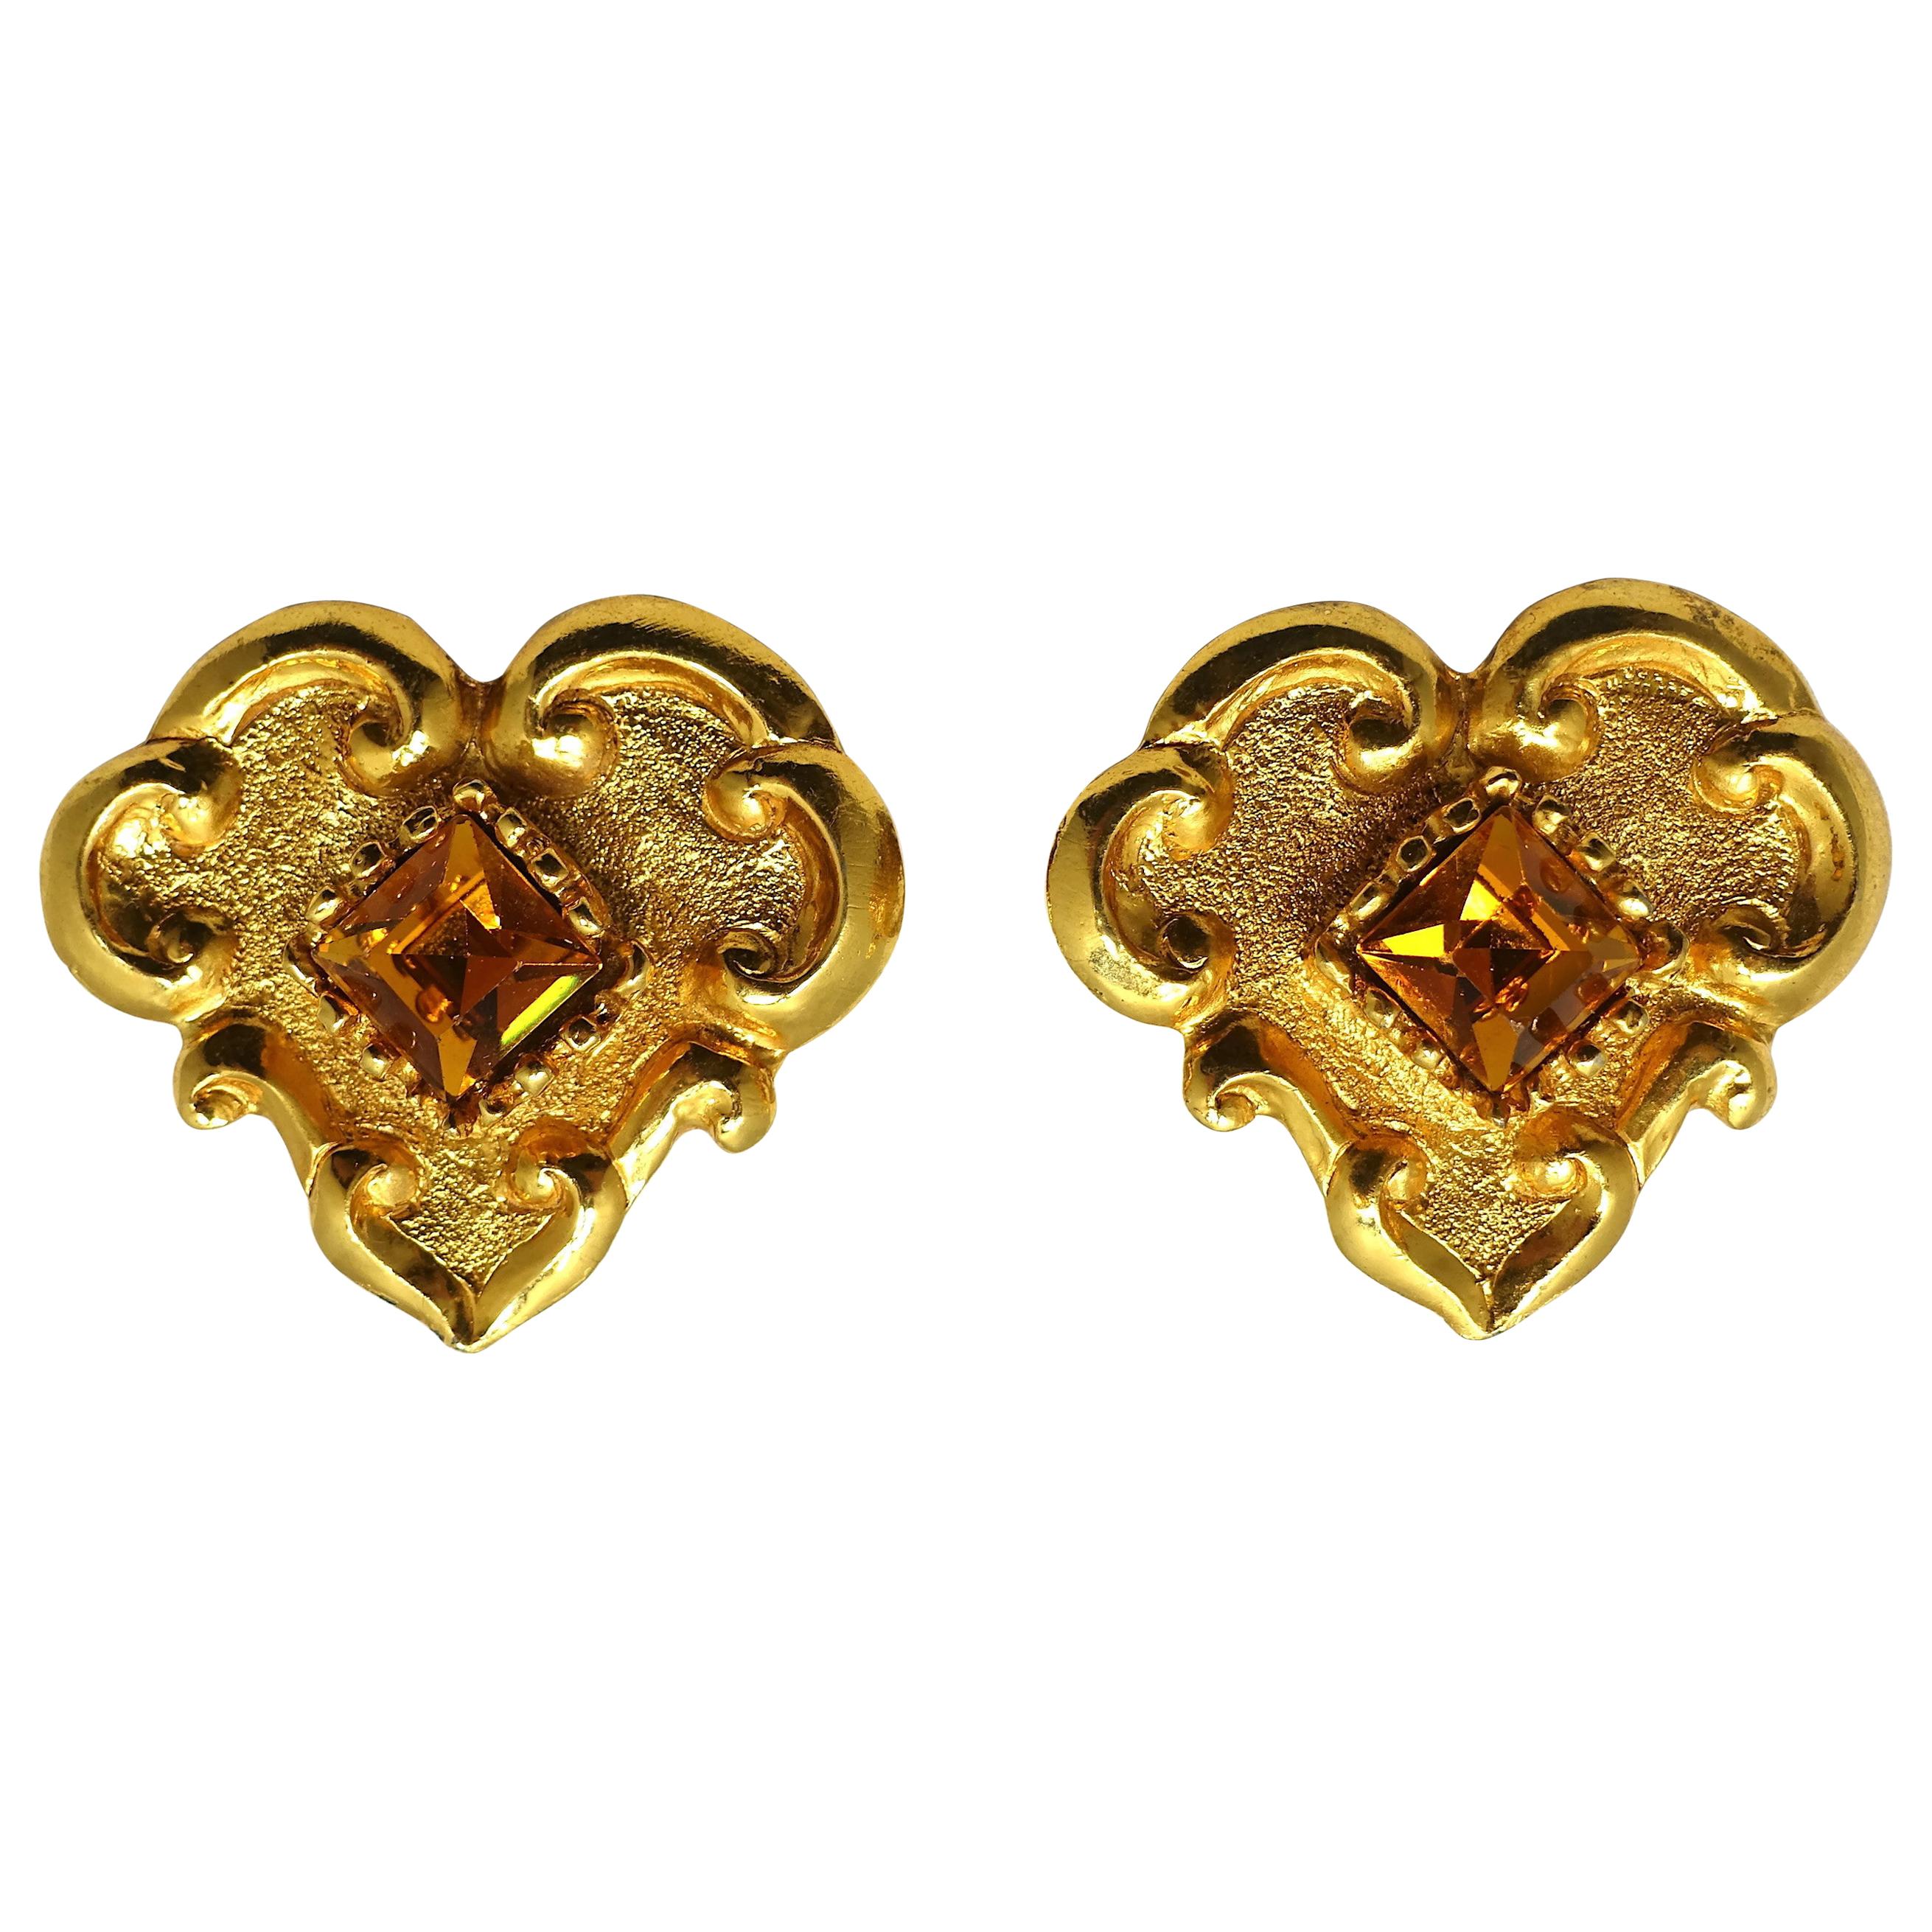 Vintage Signed Christian LaCroix Topaz Crystal Earrings For Sale